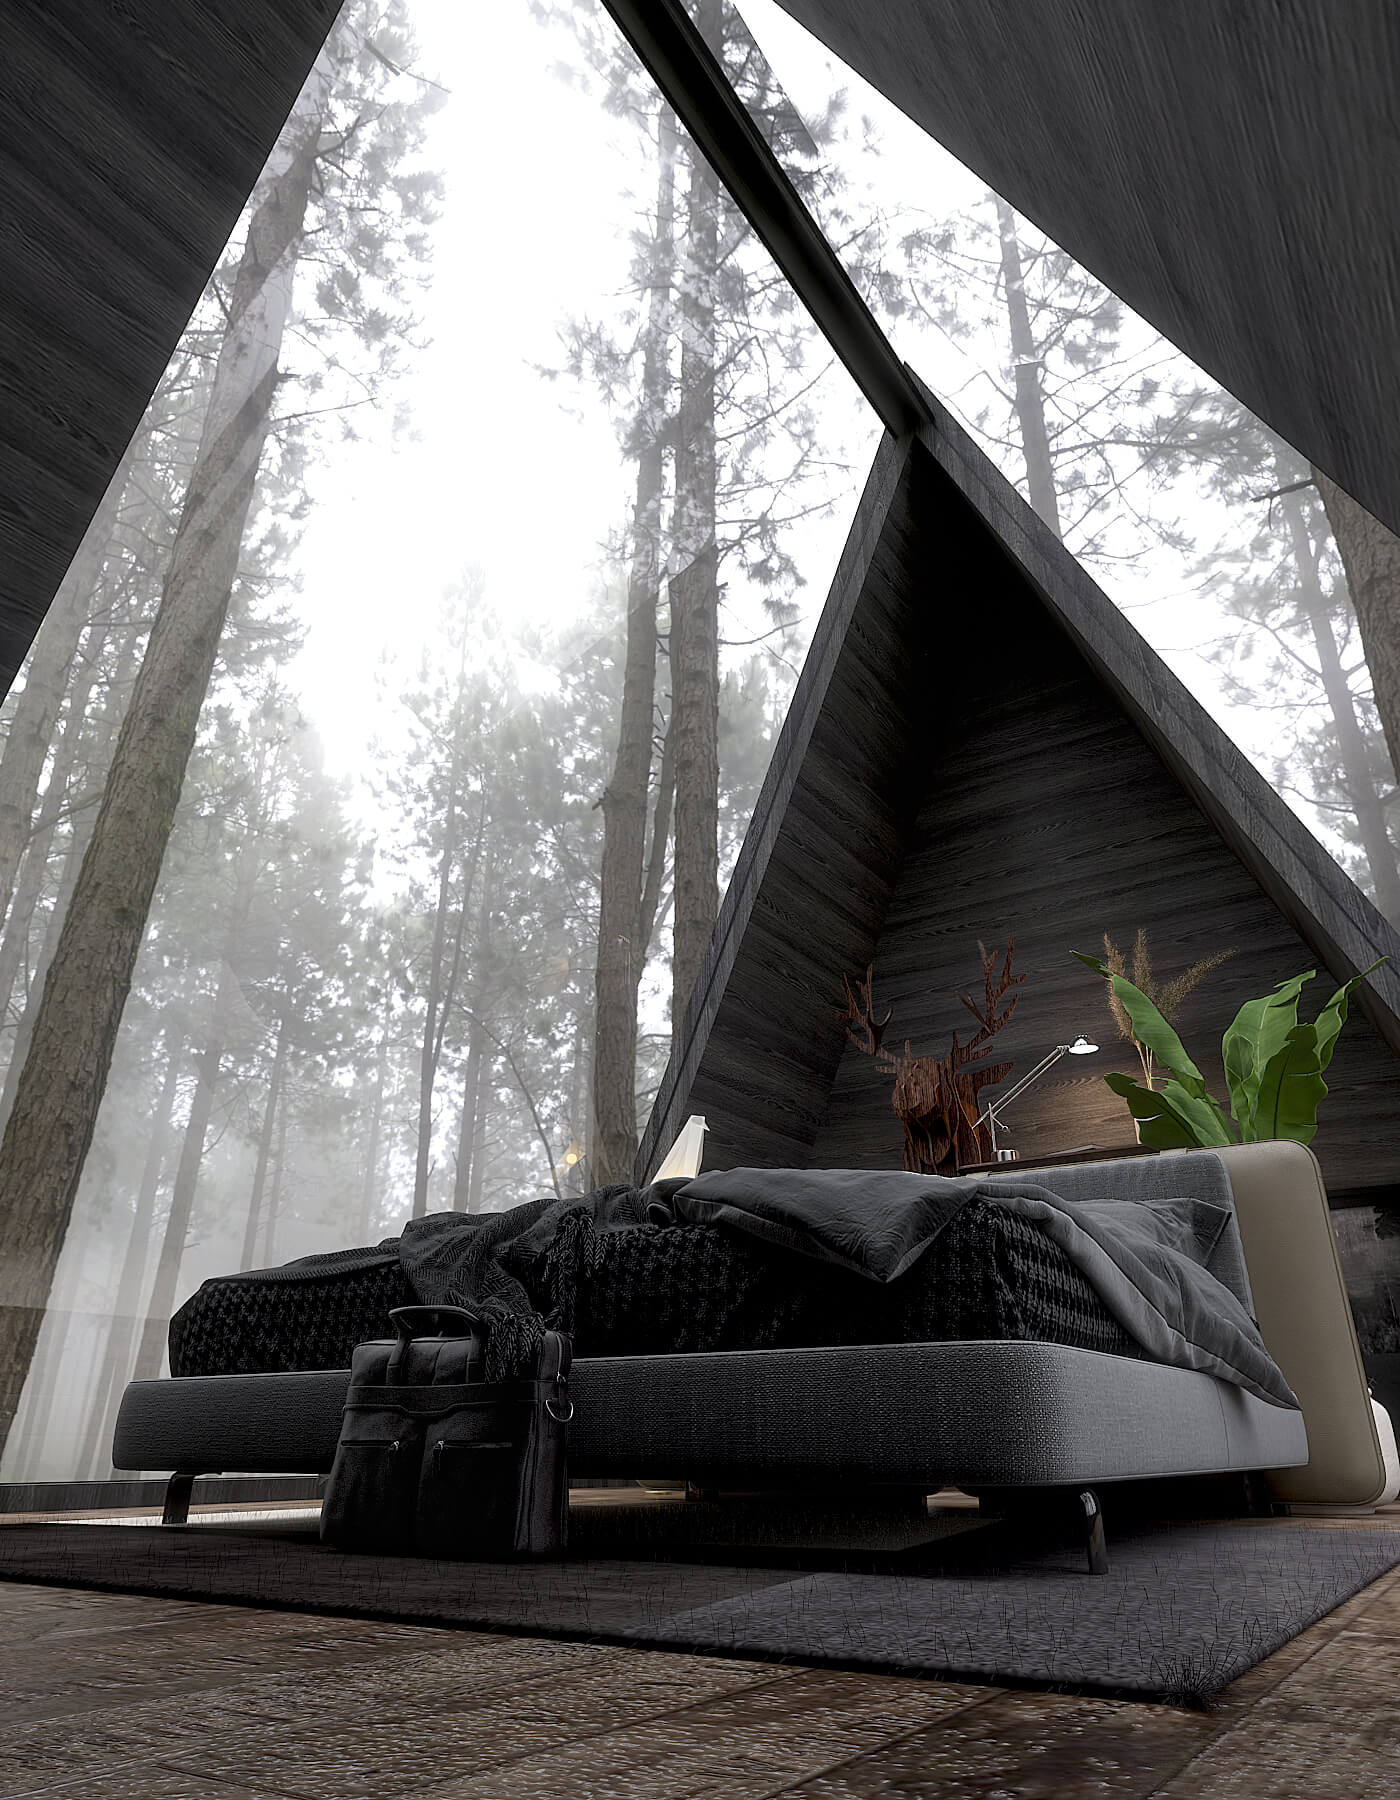 In The Woods | Tiny A-Frame House by Jay Lalka